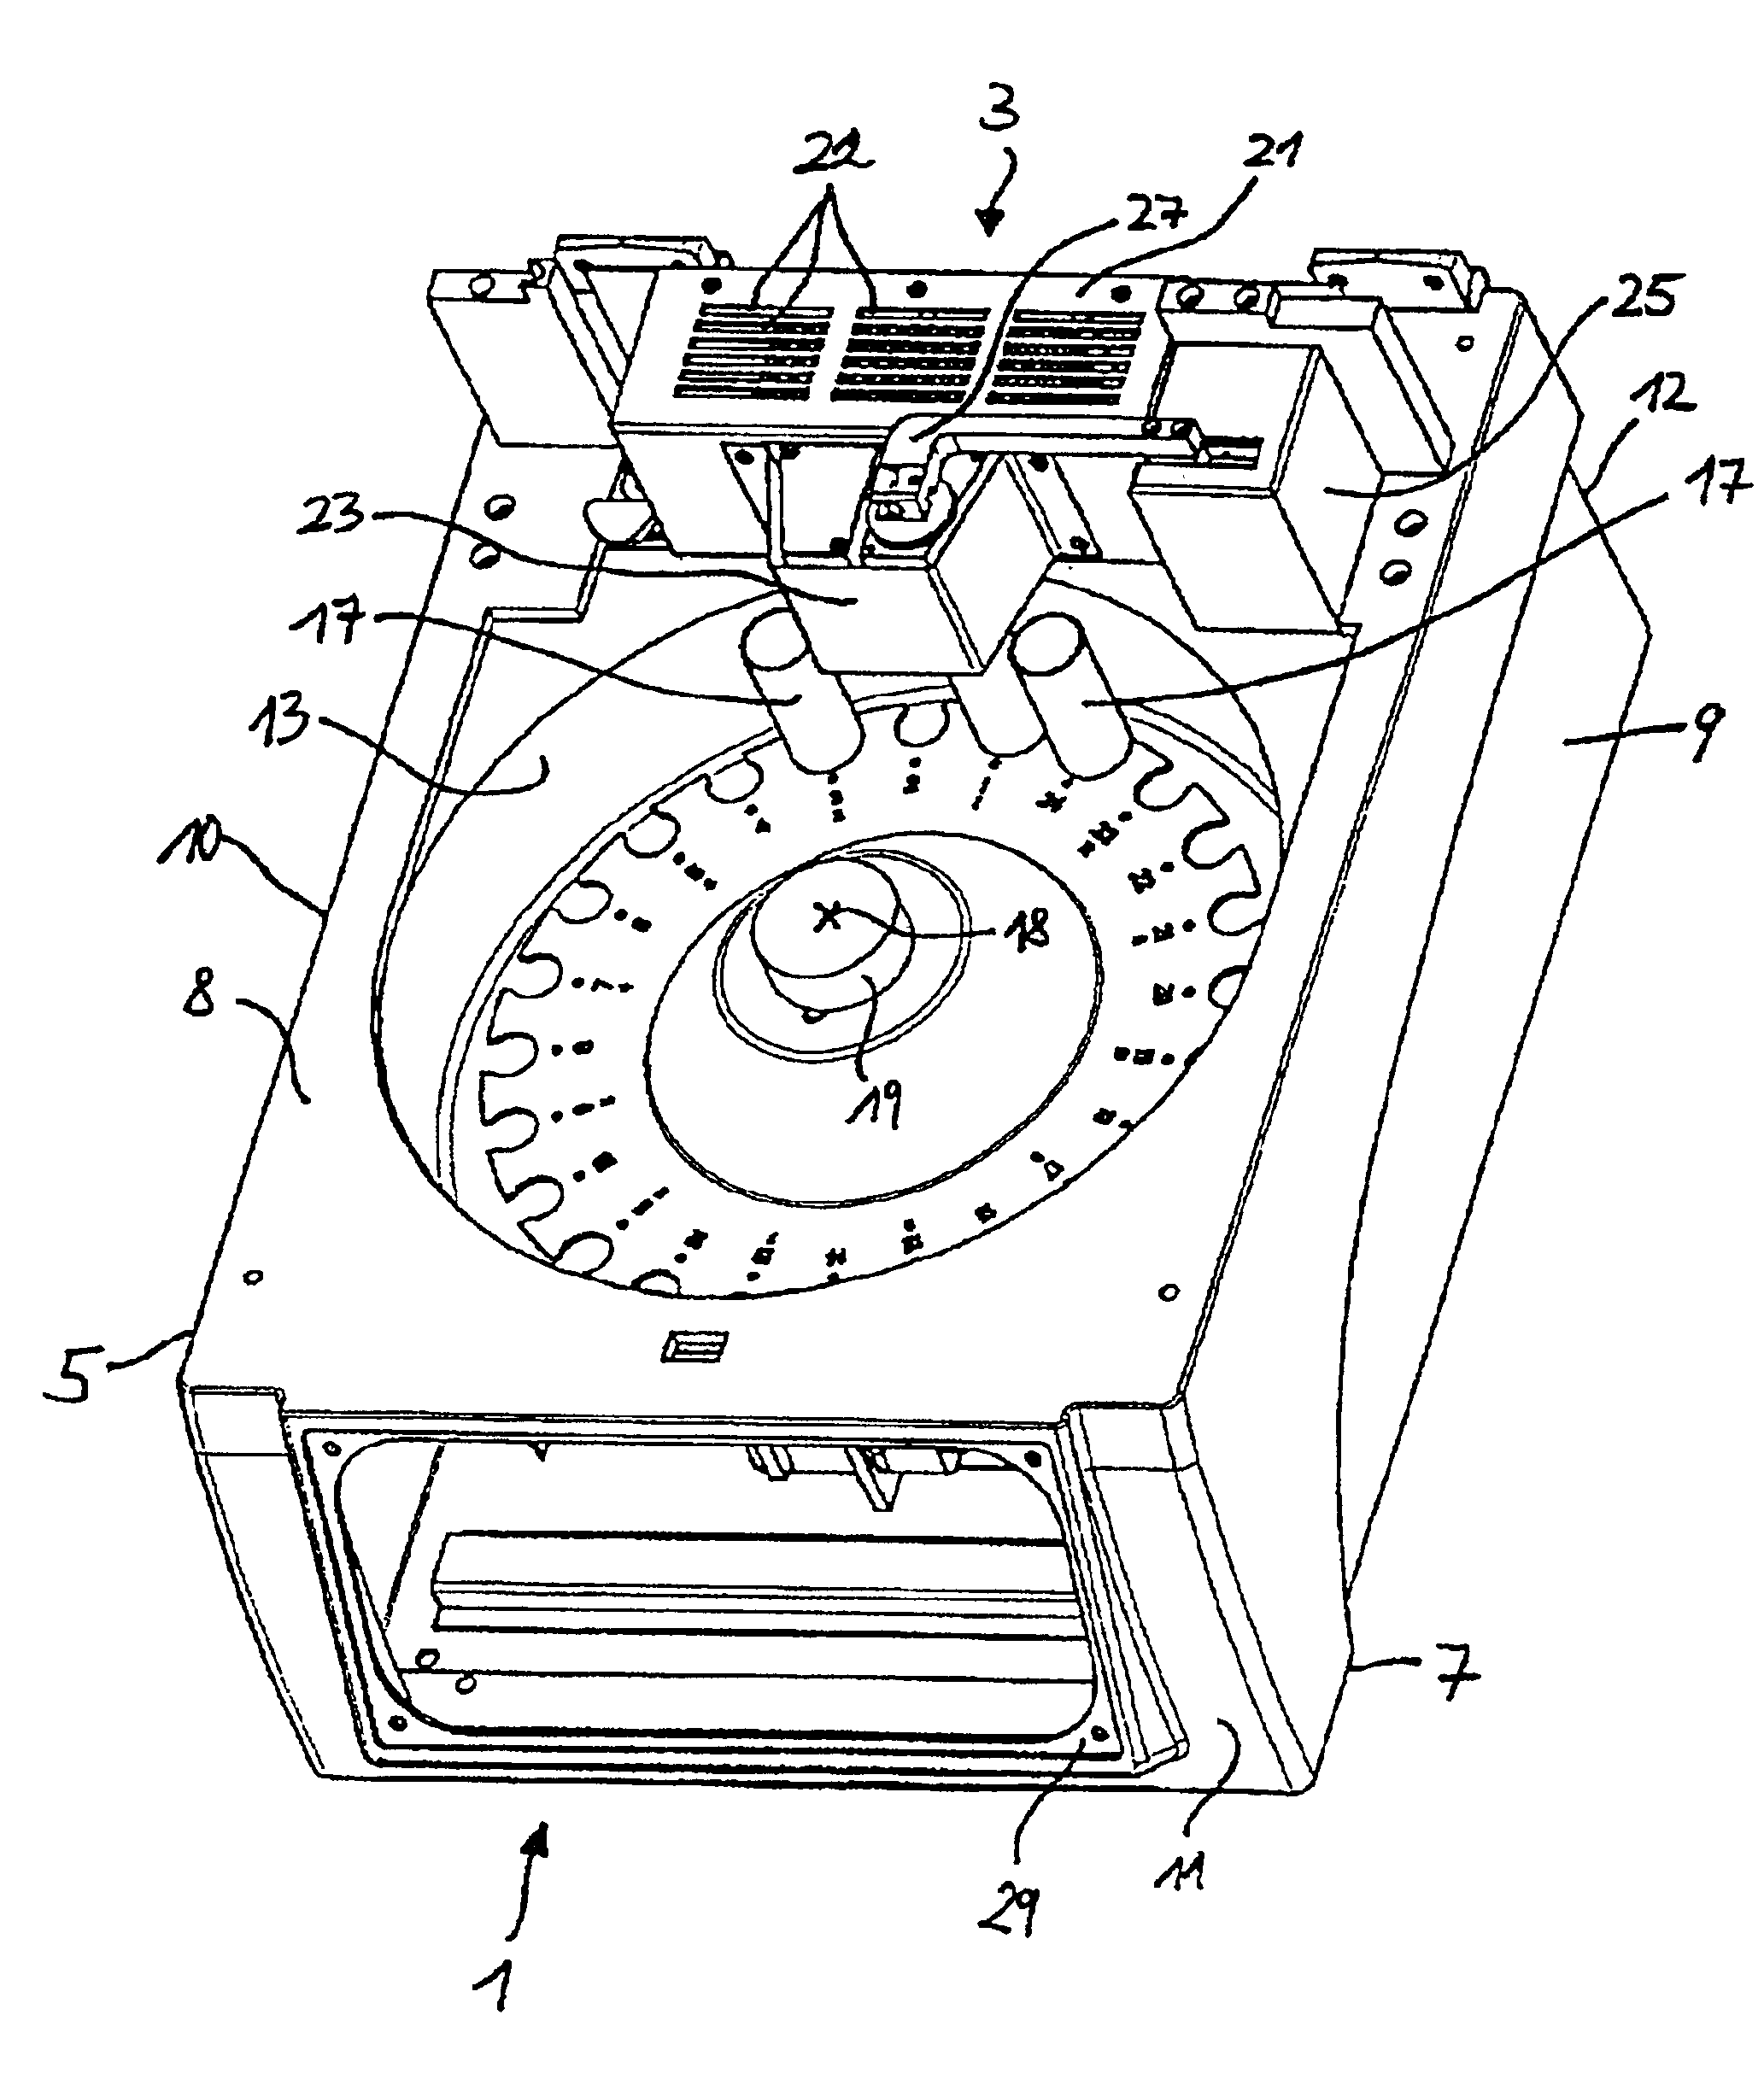 Heating and cooling device for an apparatus for tissue processing for the tissue embedding